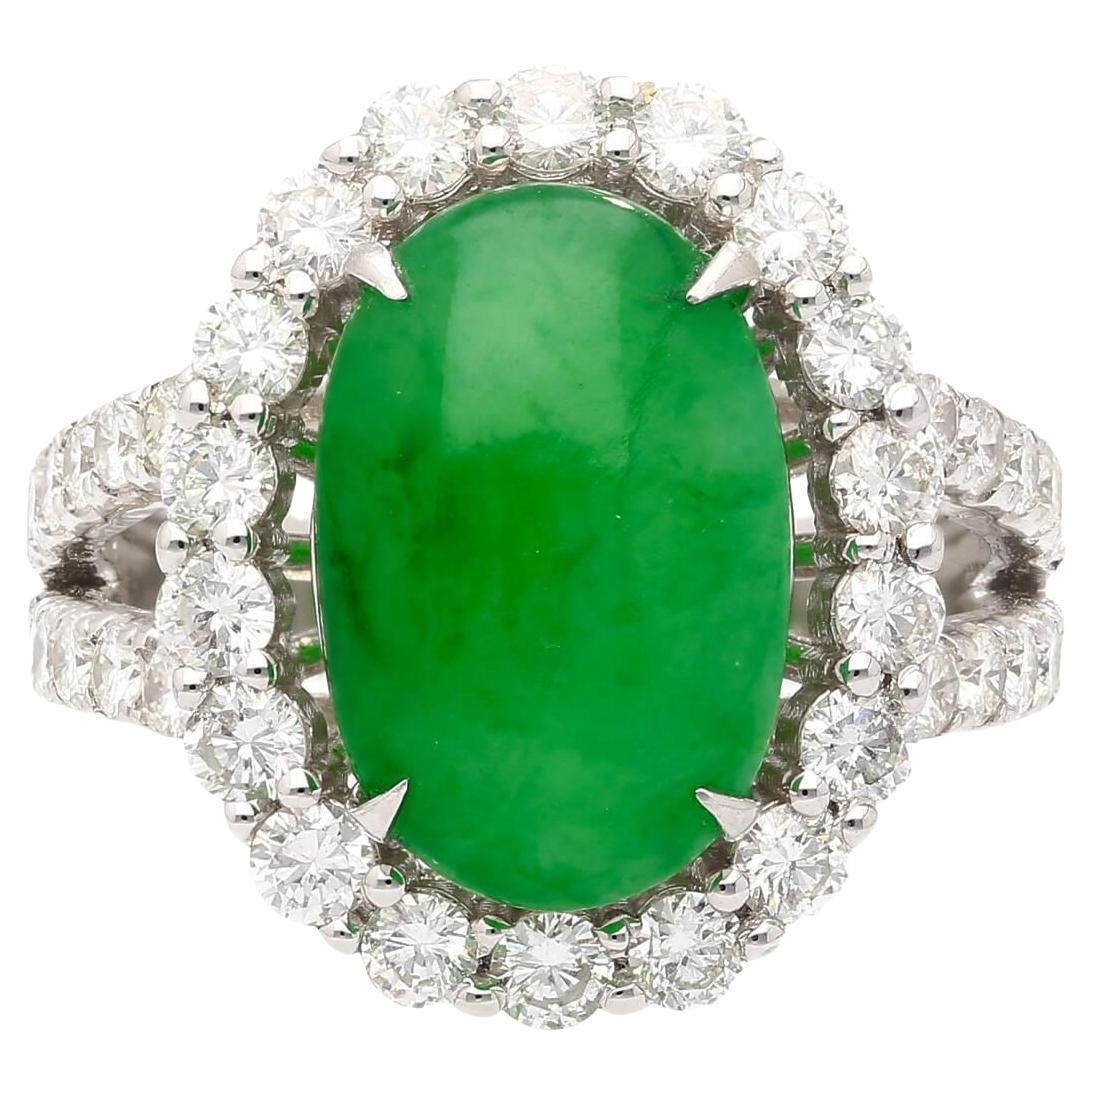 HK Lab Certified 5.329 Carat Jade and Diamond Halo Ring in 18K White Gold For Sale